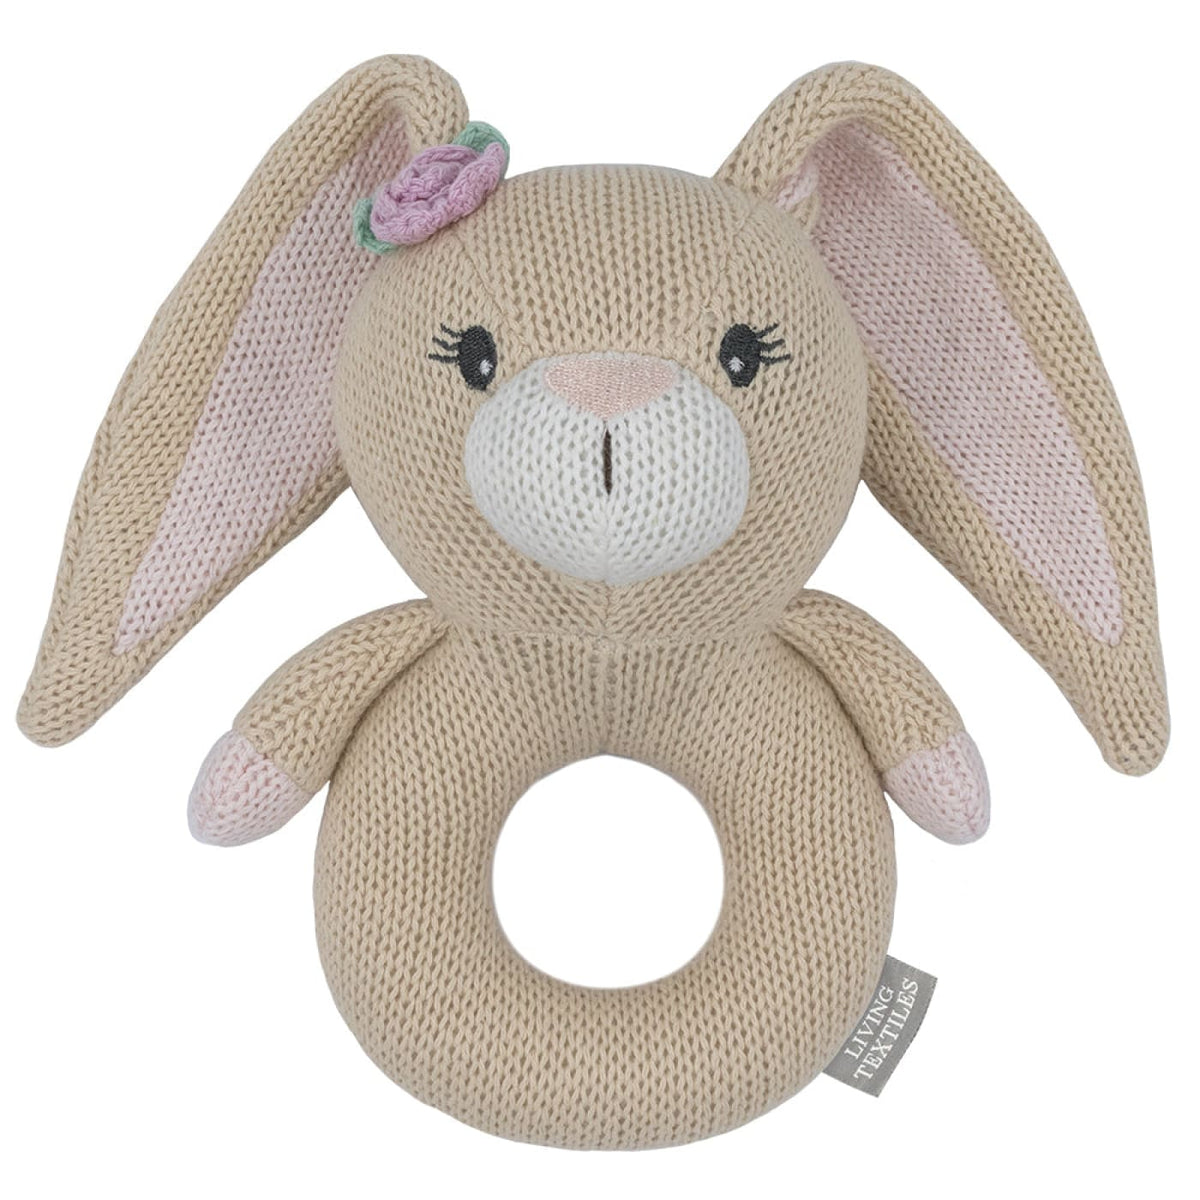 Living Textiles Whimsical Knitted Ring Rattle - Amelia Bunny - Amelia Bunny - TOYS &amp; PLAY - BLANKIES/COMFORTERS/RATTLES